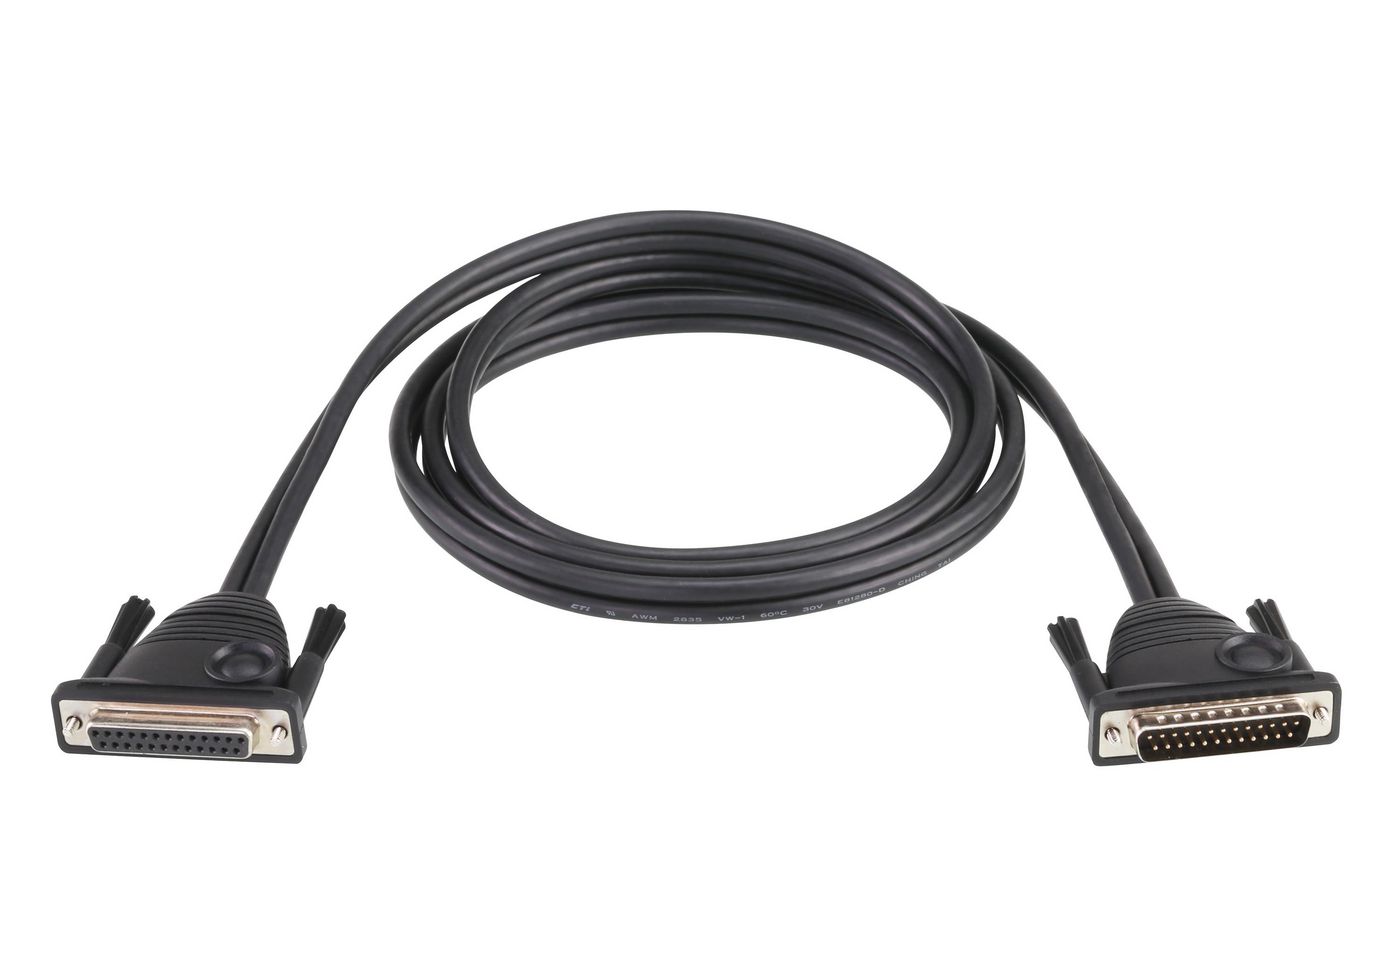 Aten 2L-2703 Daisy Cable for Cat 5 KVM 